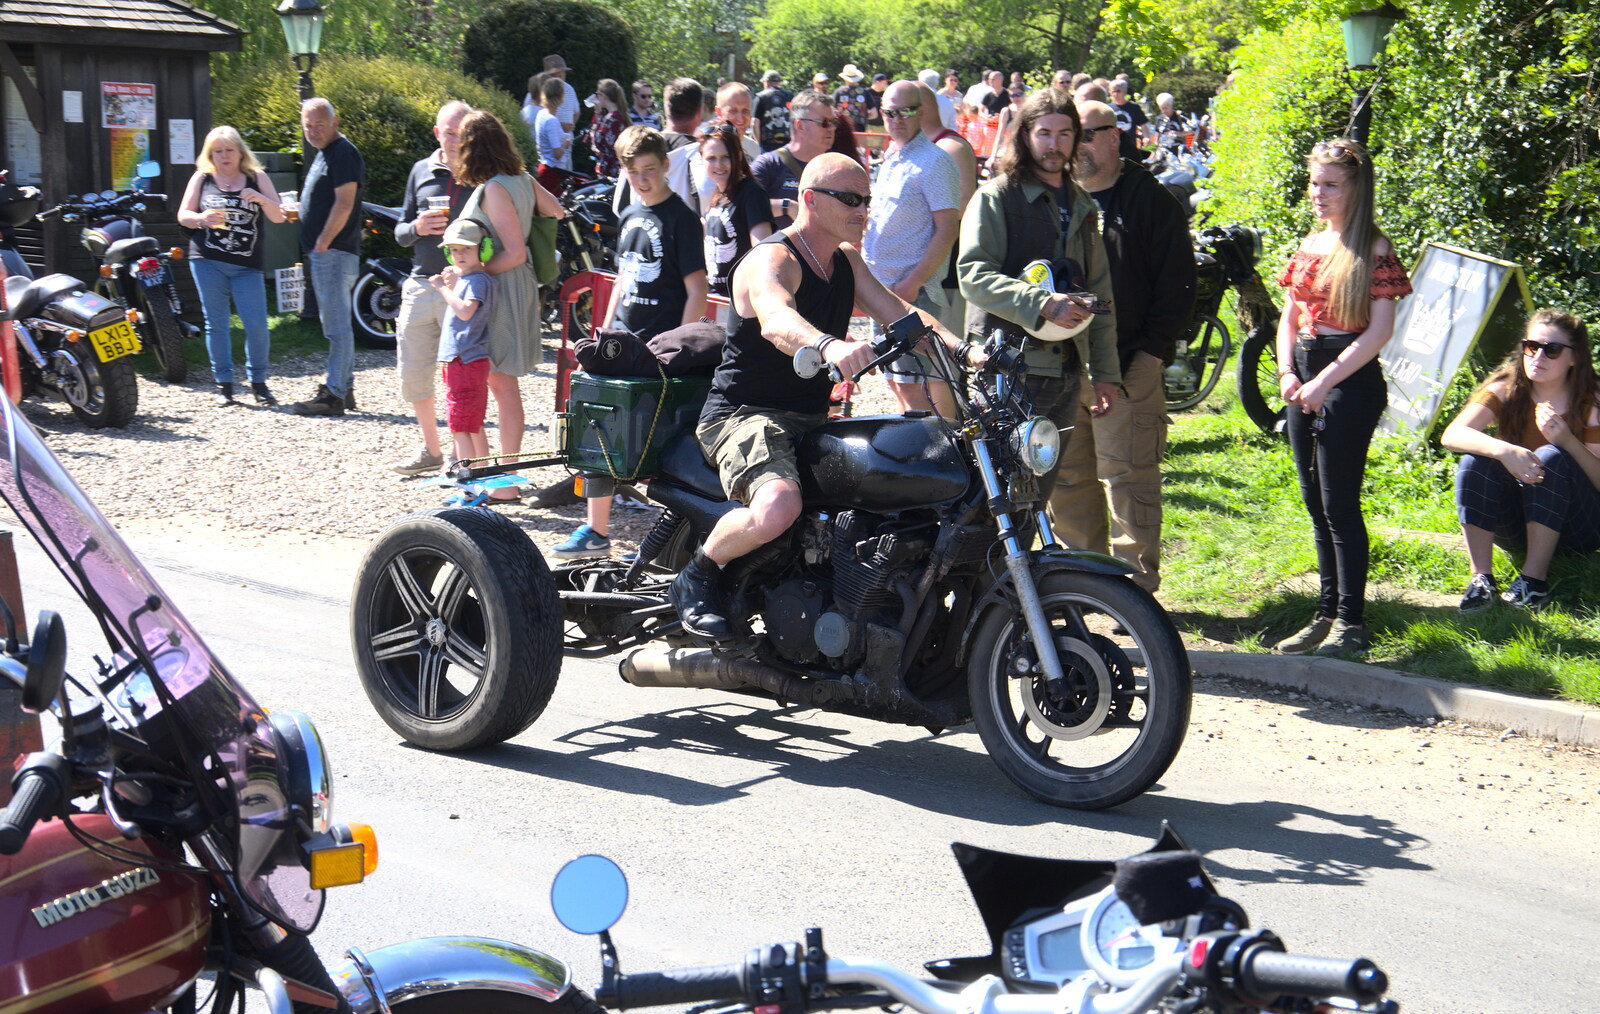 A trike trundles around from Beer, Bikes and Bands, Burston Crown, Burston, Norfolk - 6th May 2018